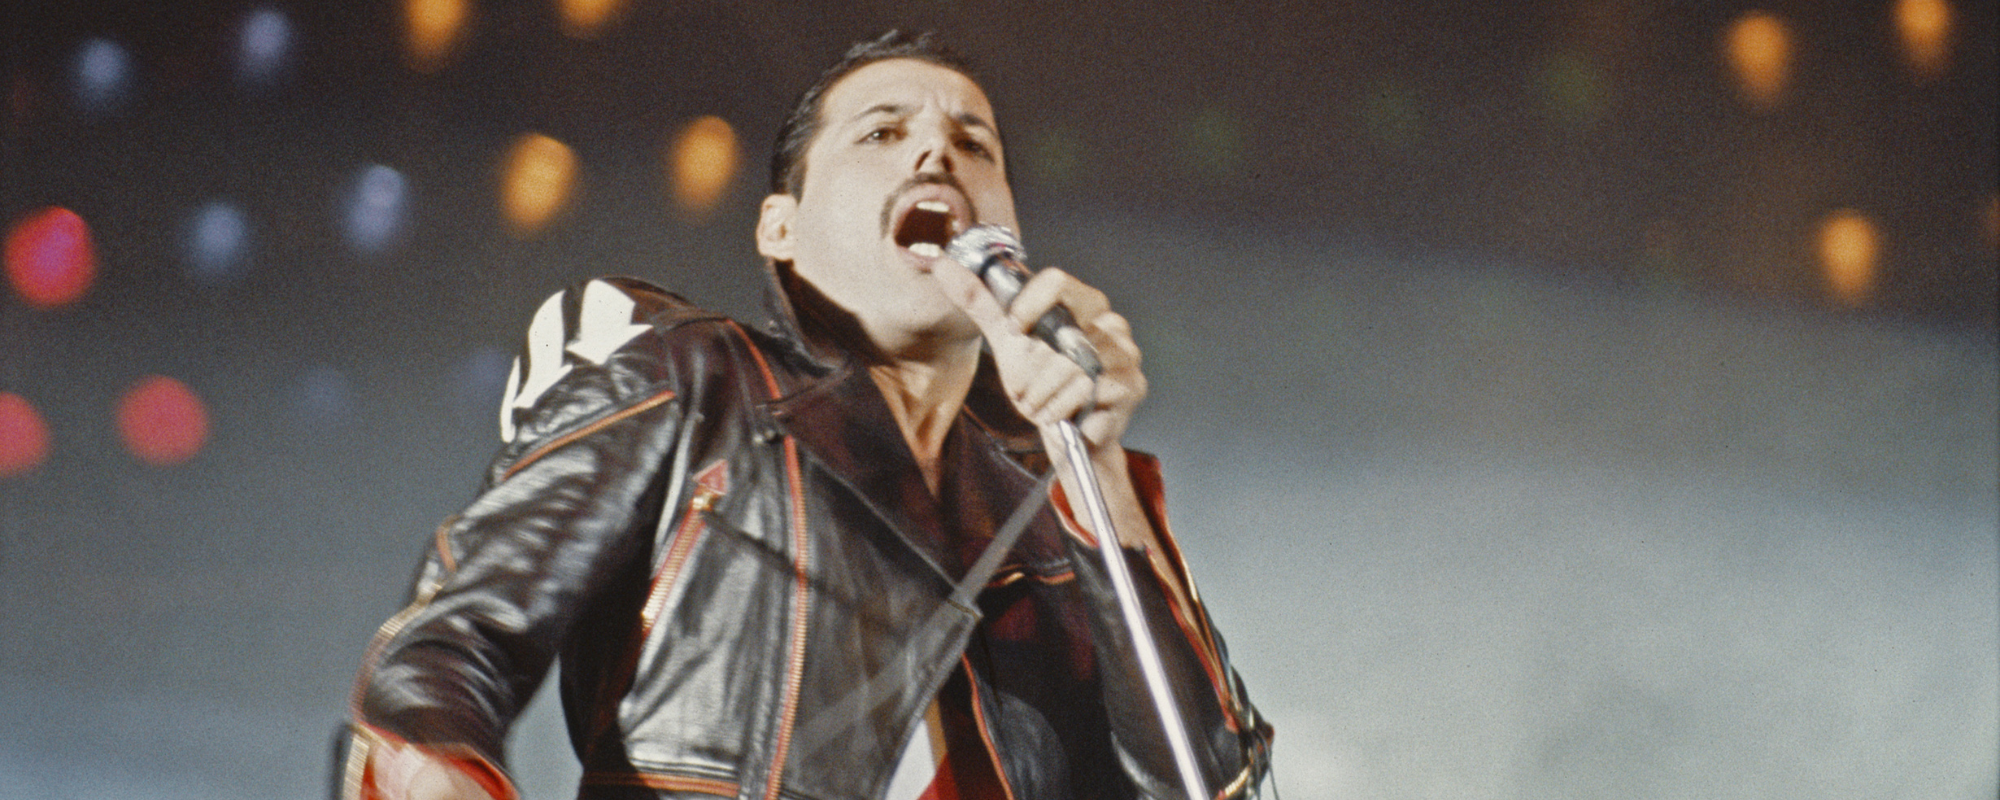 Remember When MTV Banned Queen? It Was the First Time They Outlawed an Artist